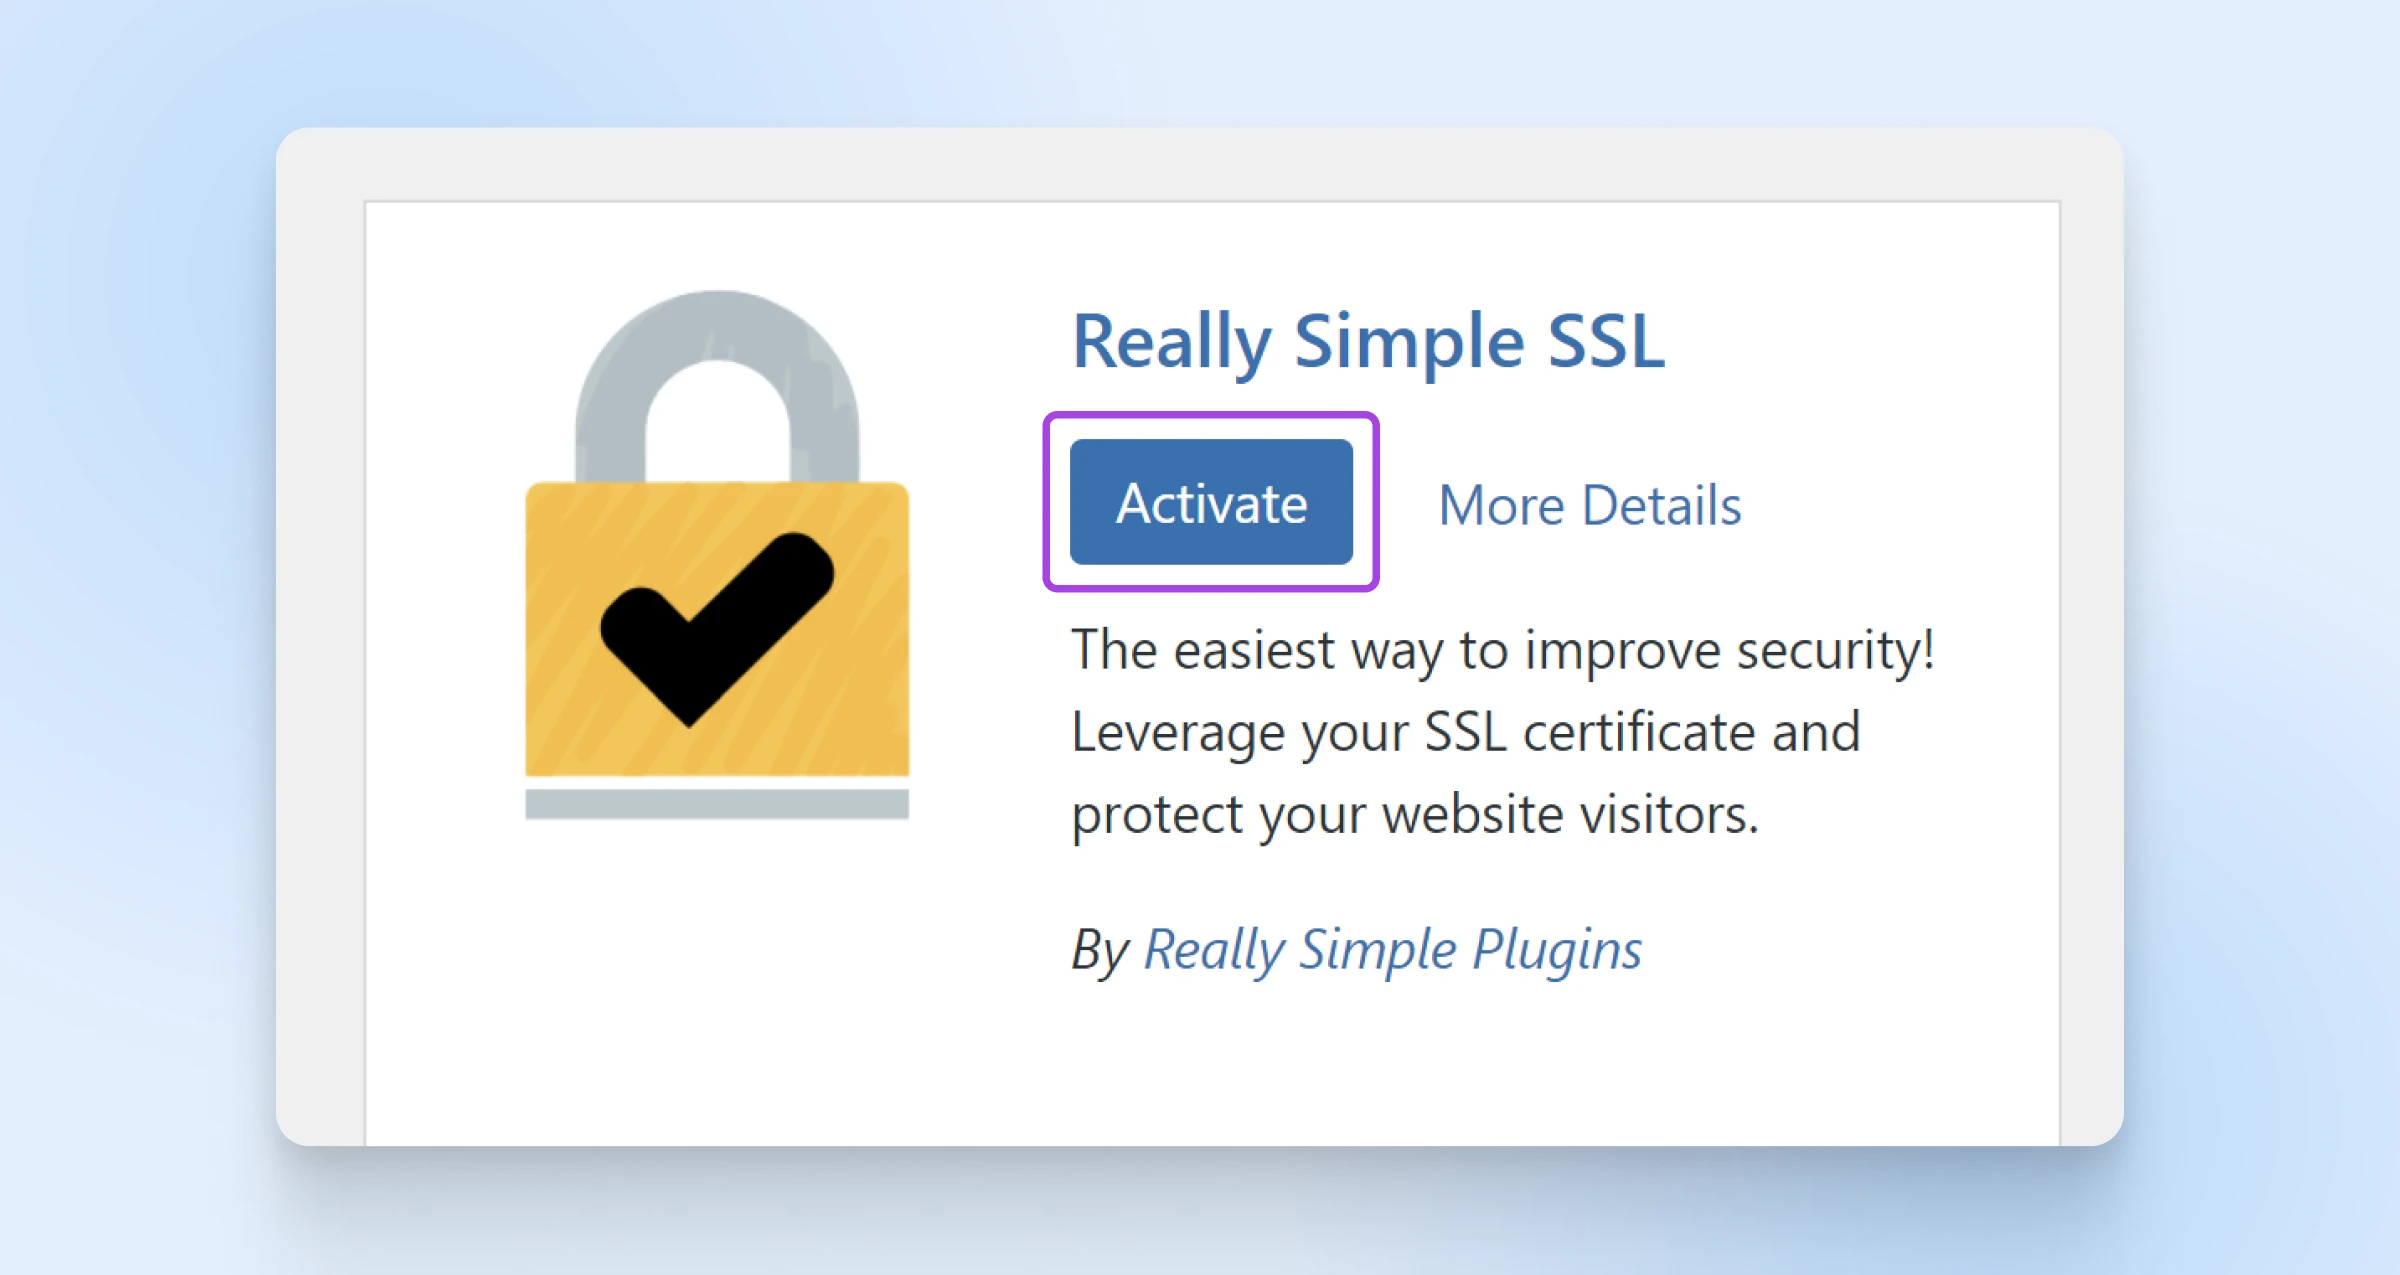 Dialog box showing the "Activate" blue button highlighted under Really Simple SSL plugin.